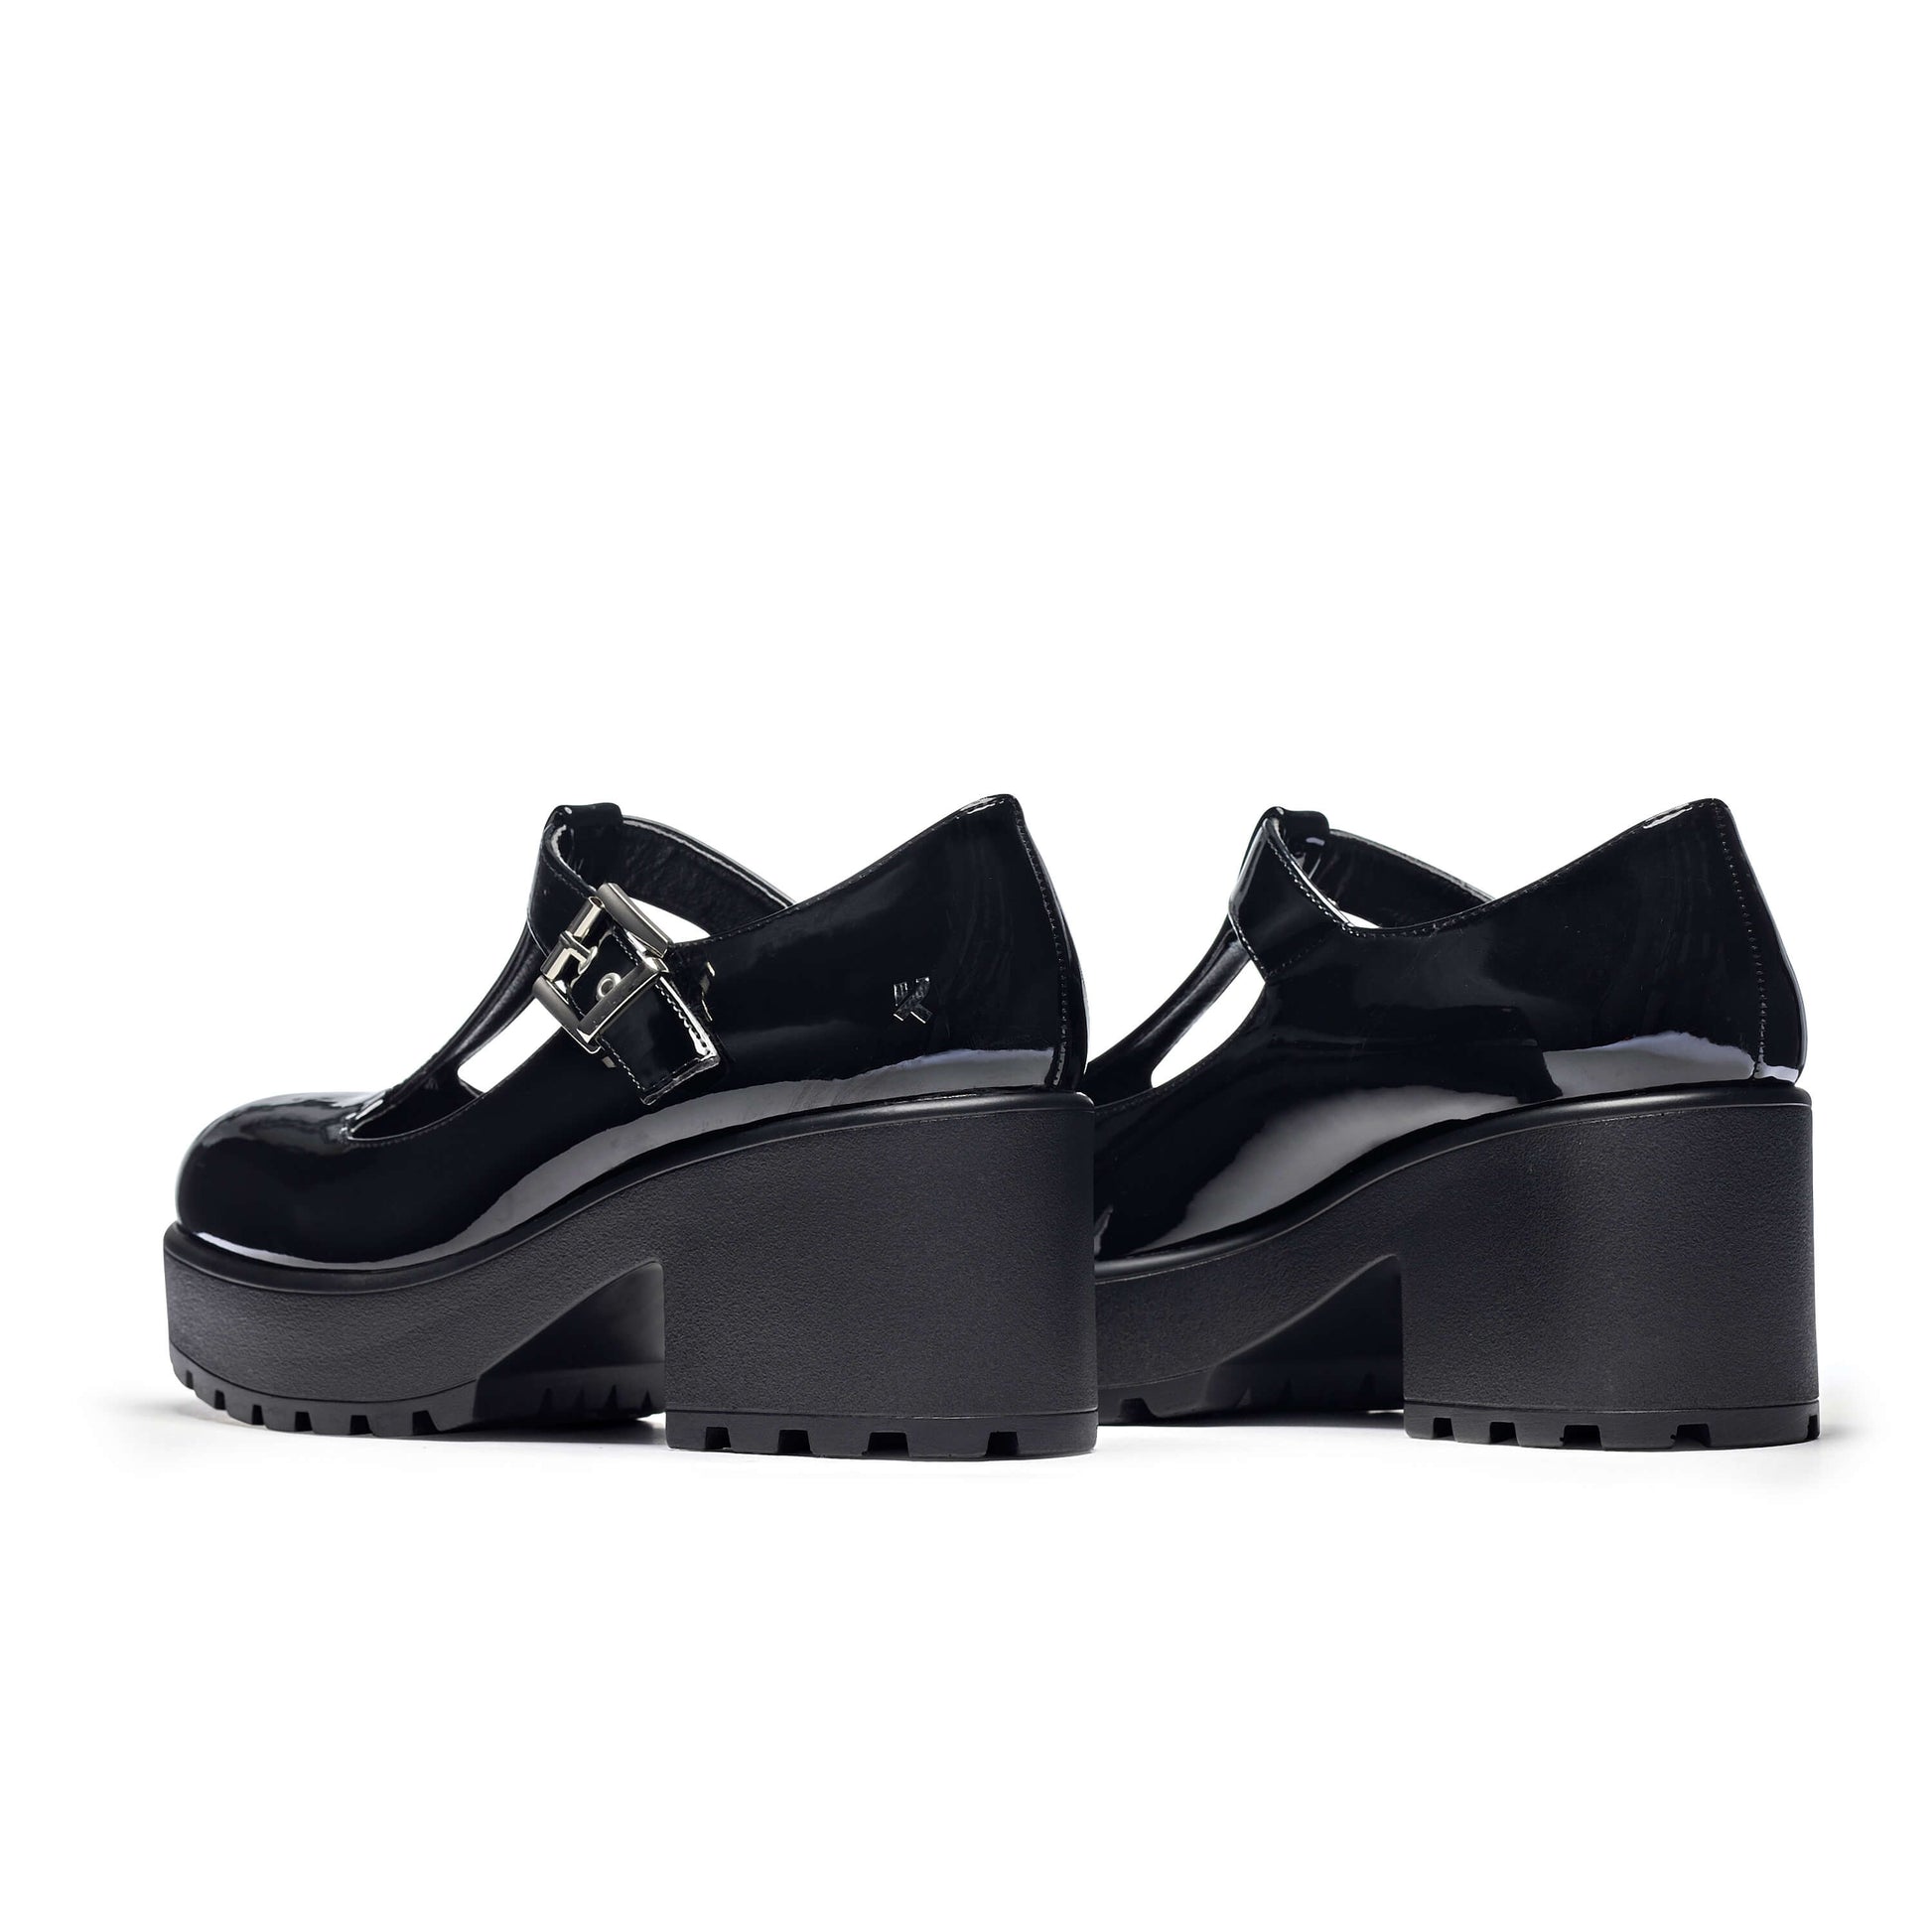 SAI Black Mary Jane Shoes 'Patent Edition' - Mary Janes - KOI Footwear - Black - Back View